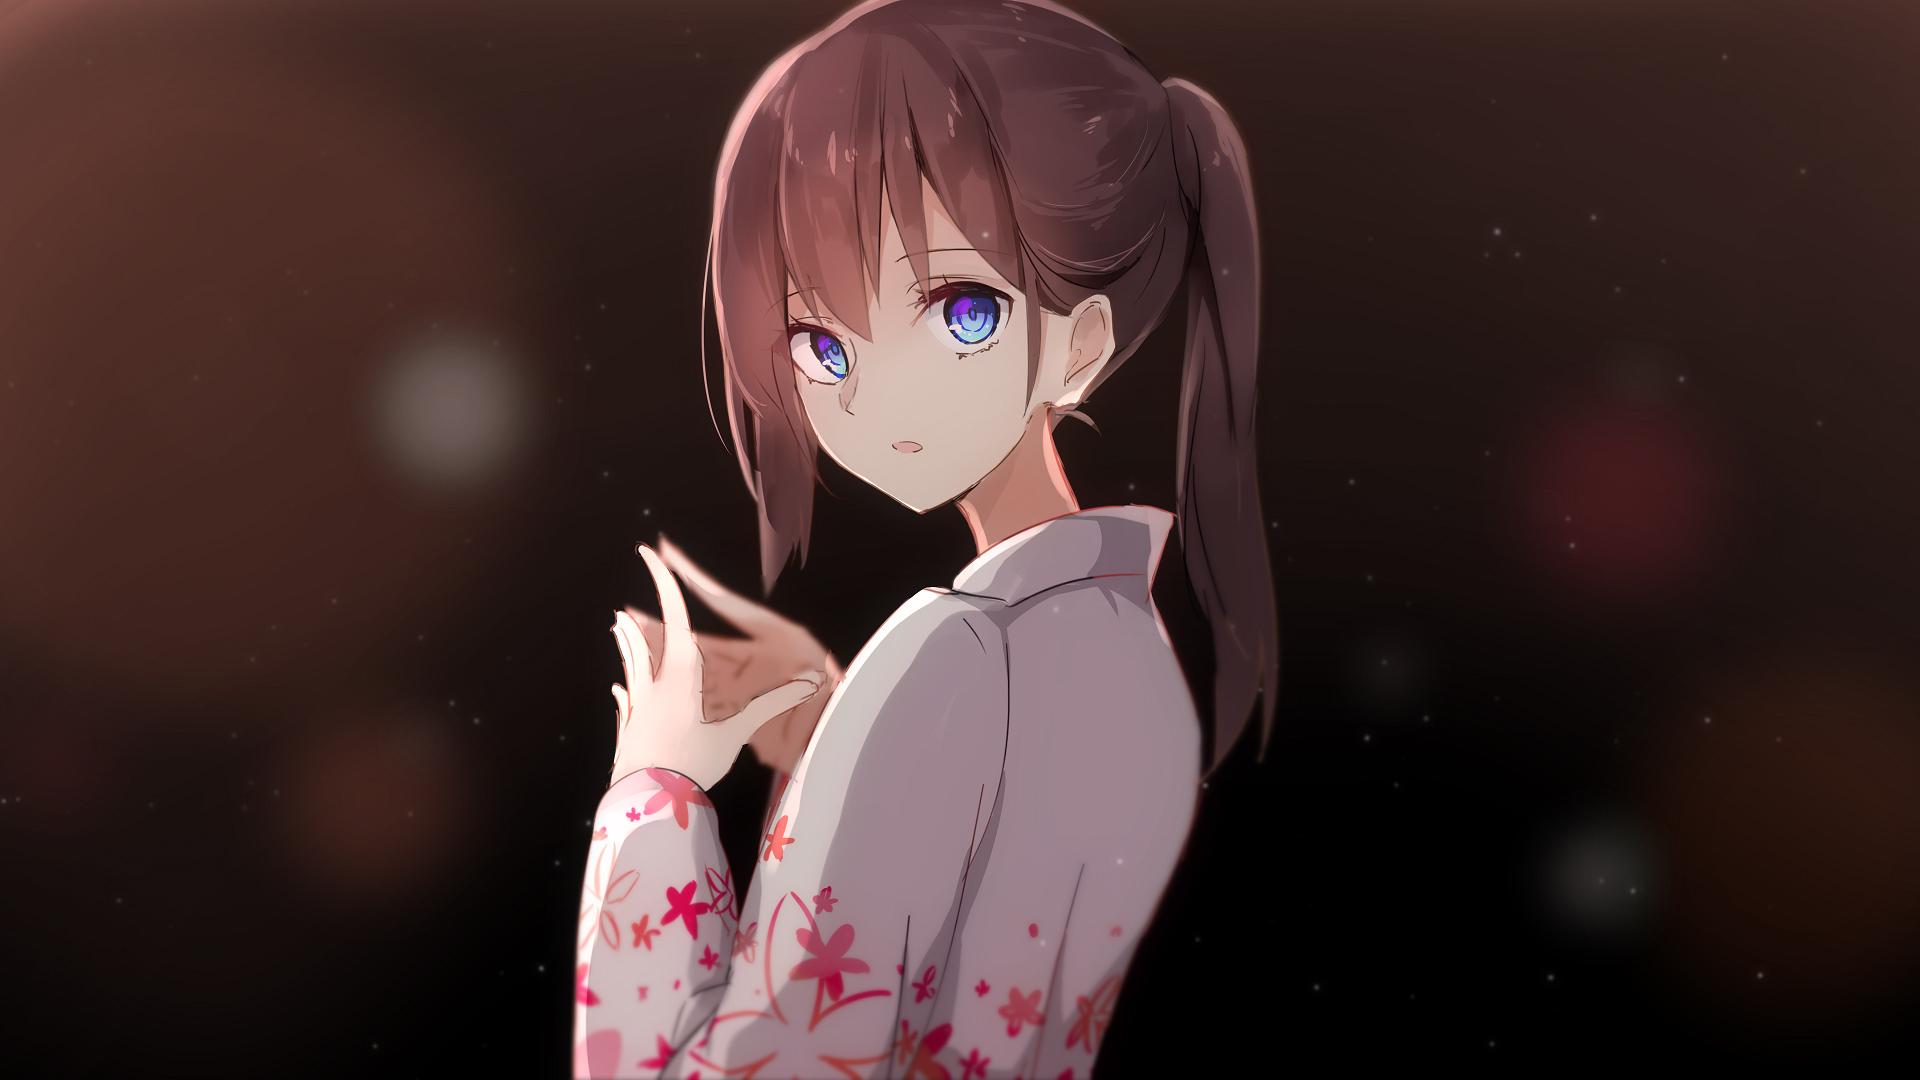 Girl Anime Gk Girl With Brown Hair And Blue Eyes, HD